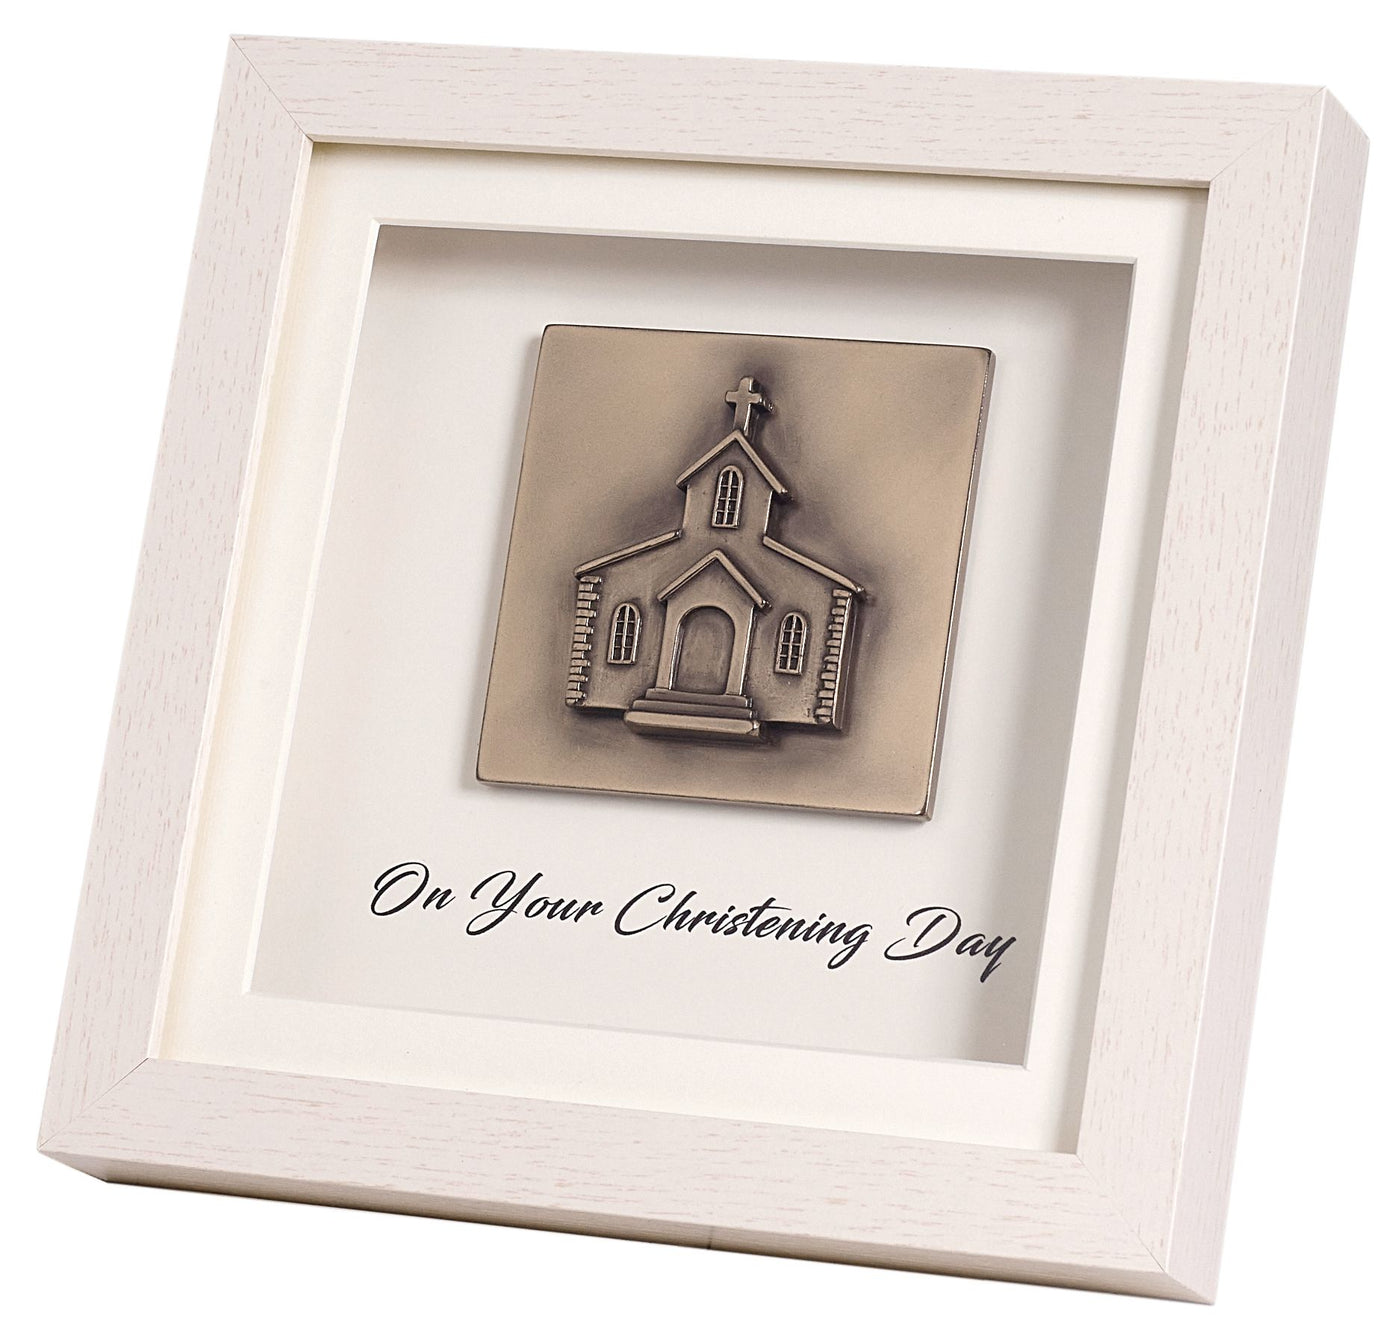 Genesis Framed Occasions Plaque - Christening Day